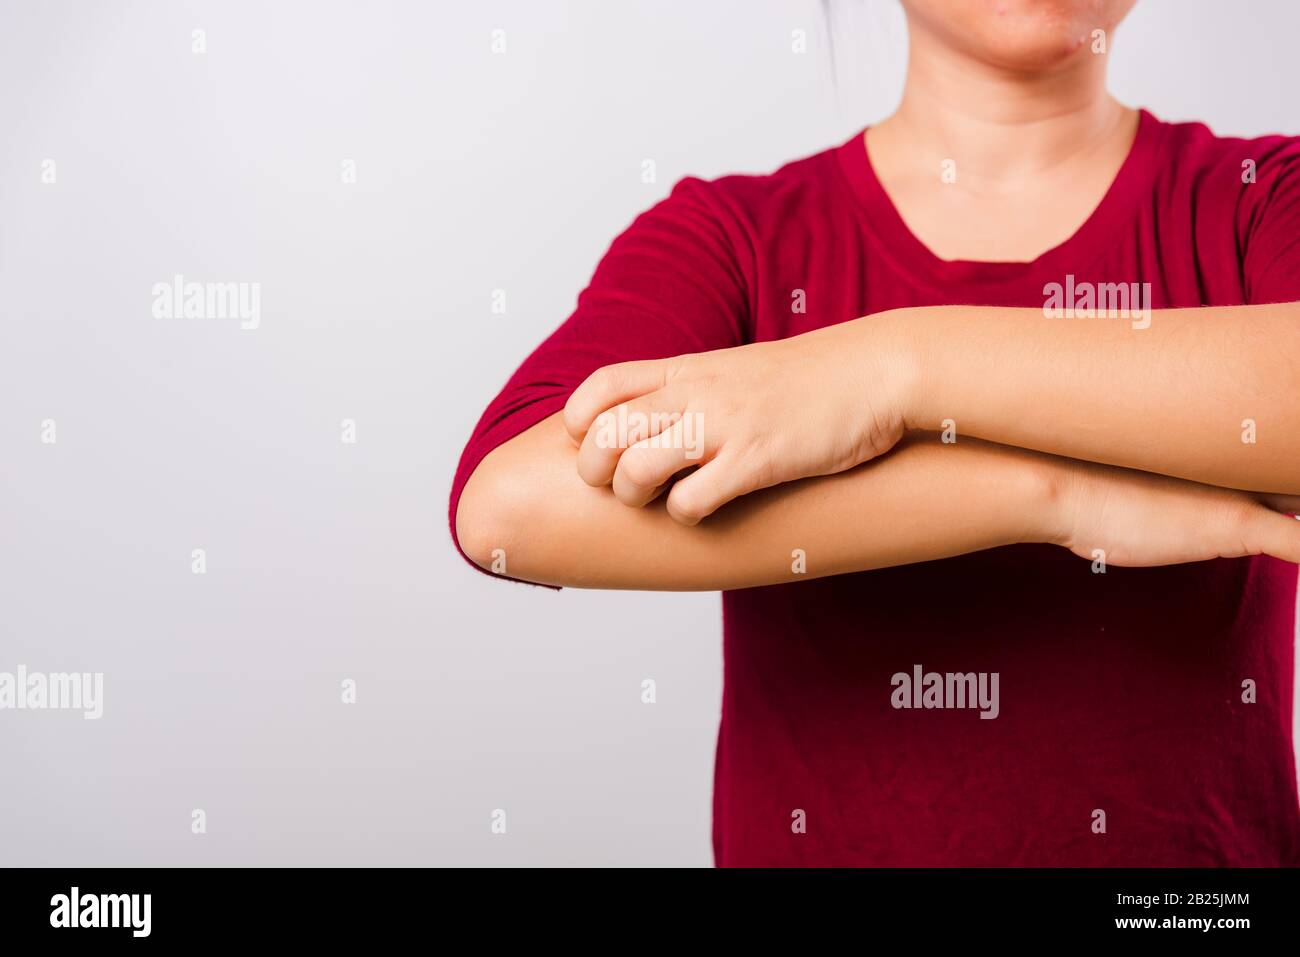 Asian beautiful woman itching her scratching her itchy arm on white background with copy space, Medical and Healthcare concept Stock Photo